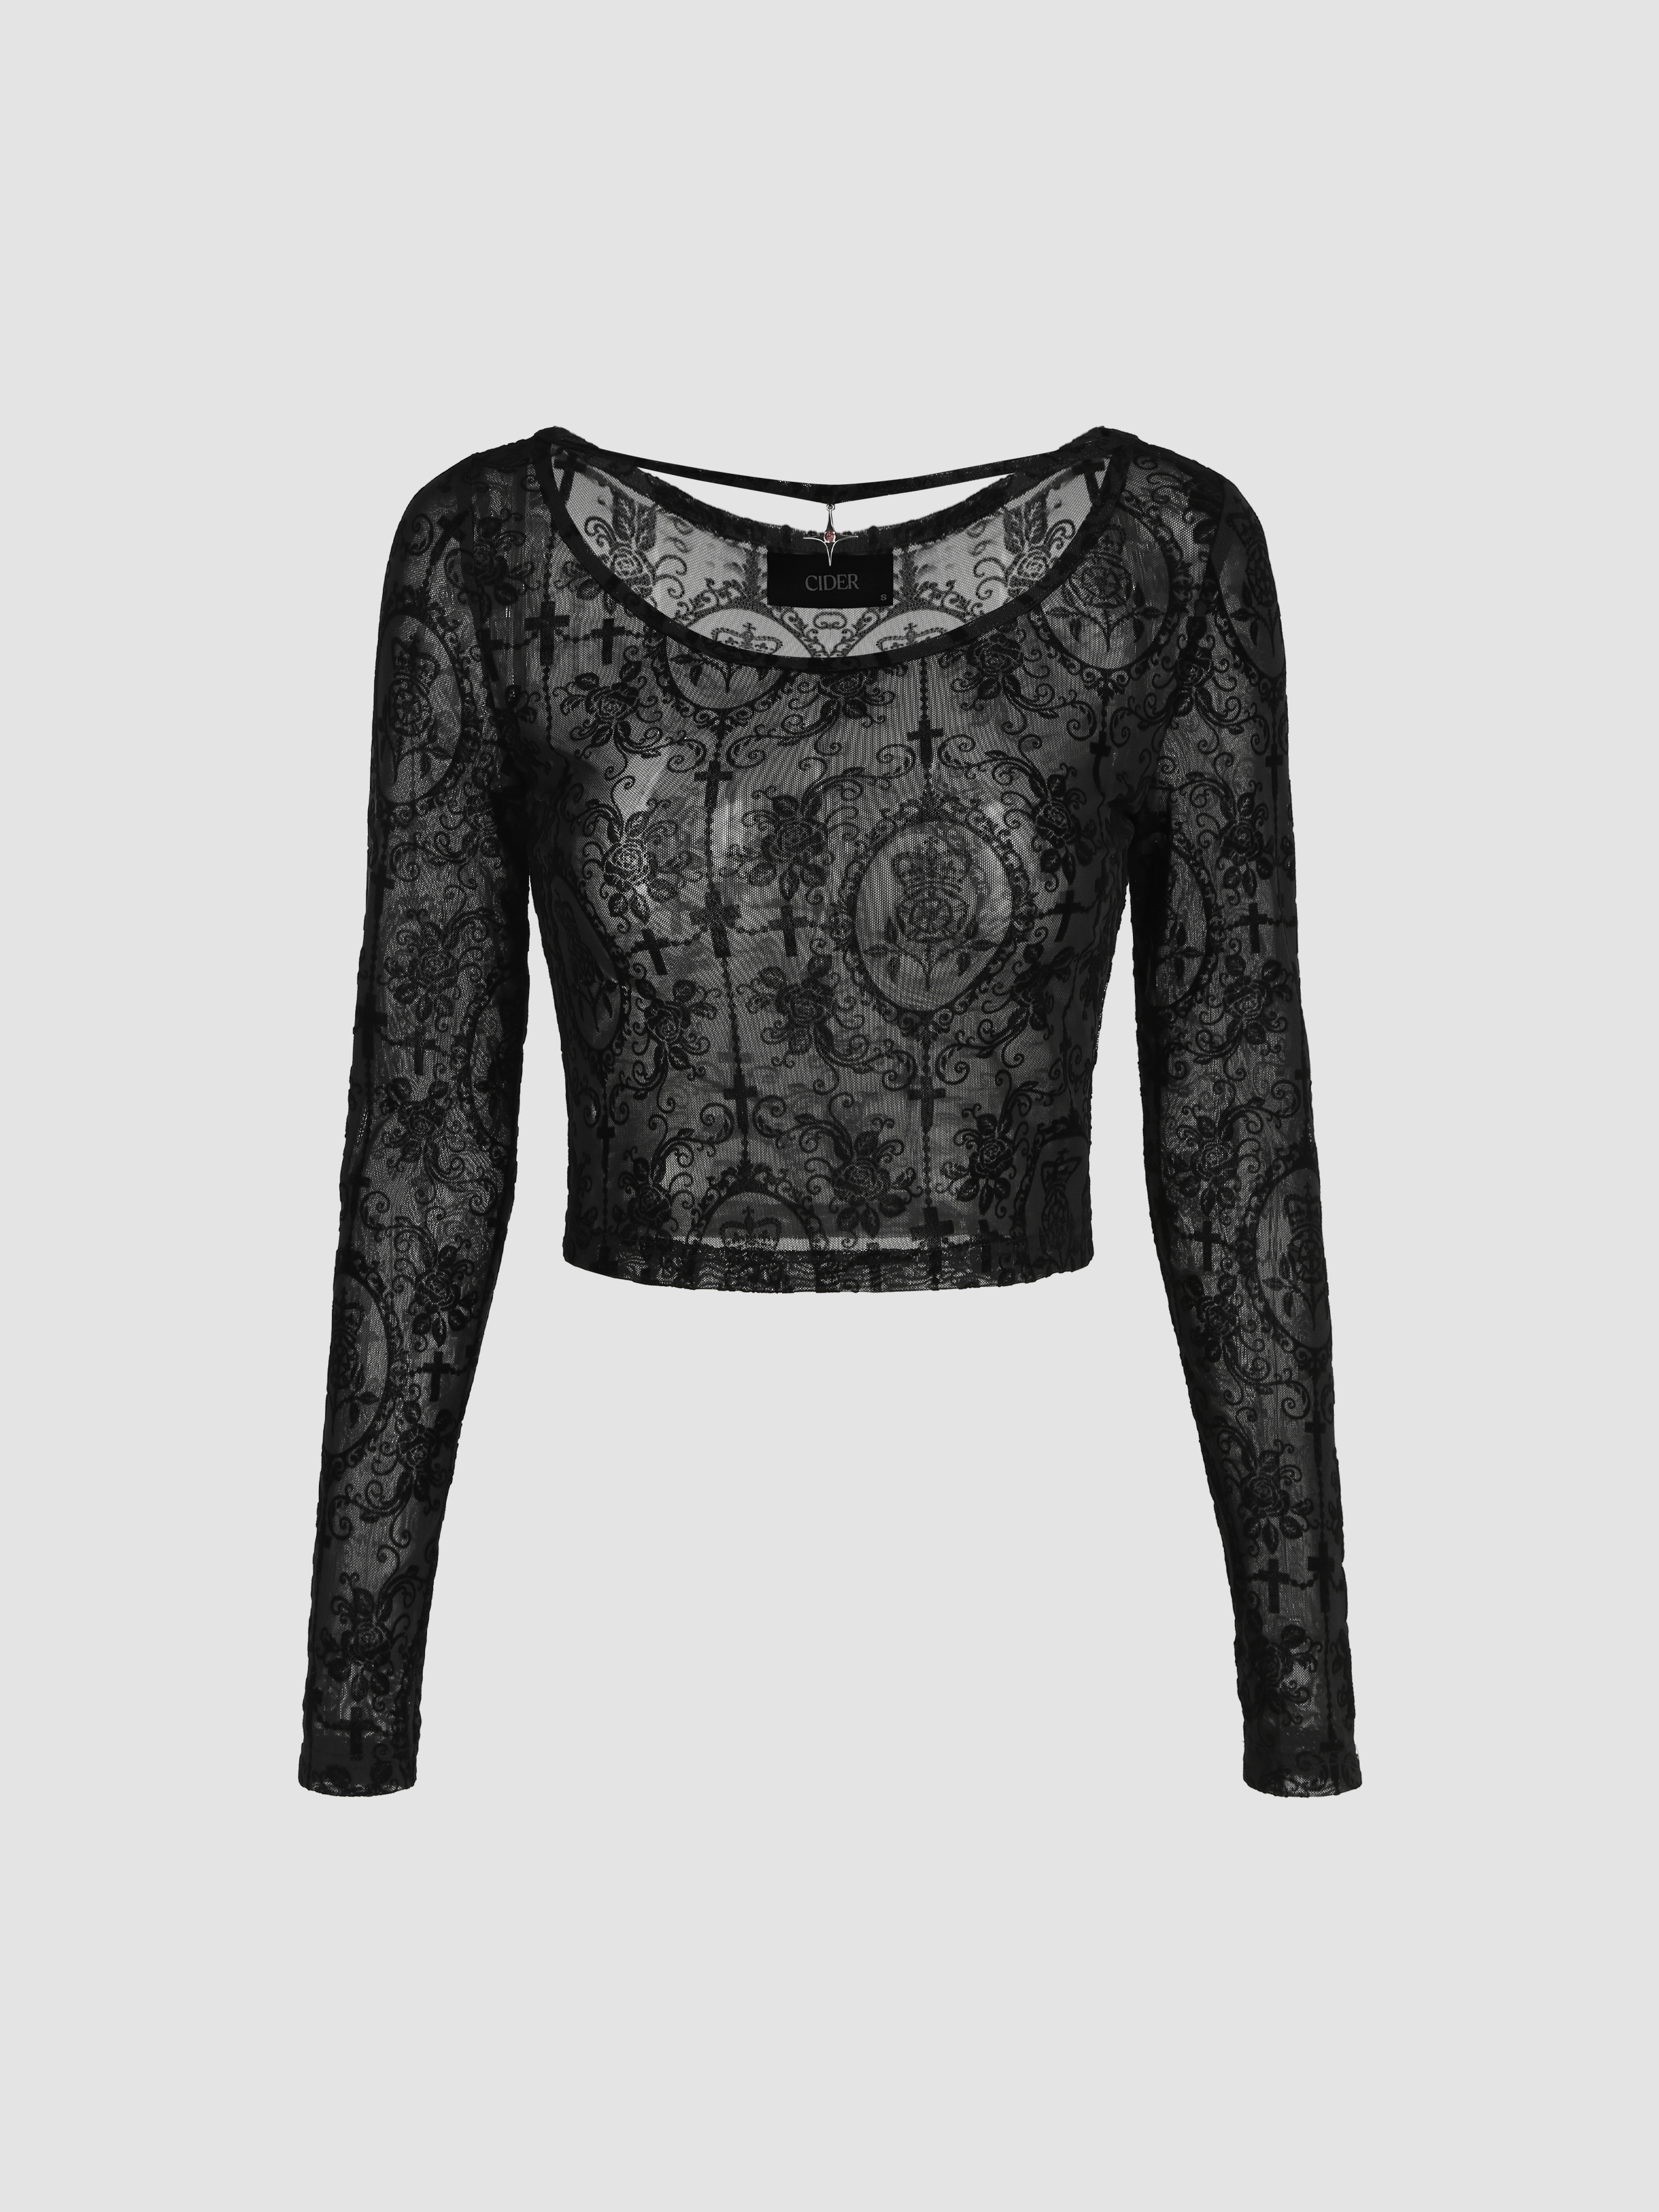 Jacquard Round Neckline Floral Lace Long Sleeve Top - Cider